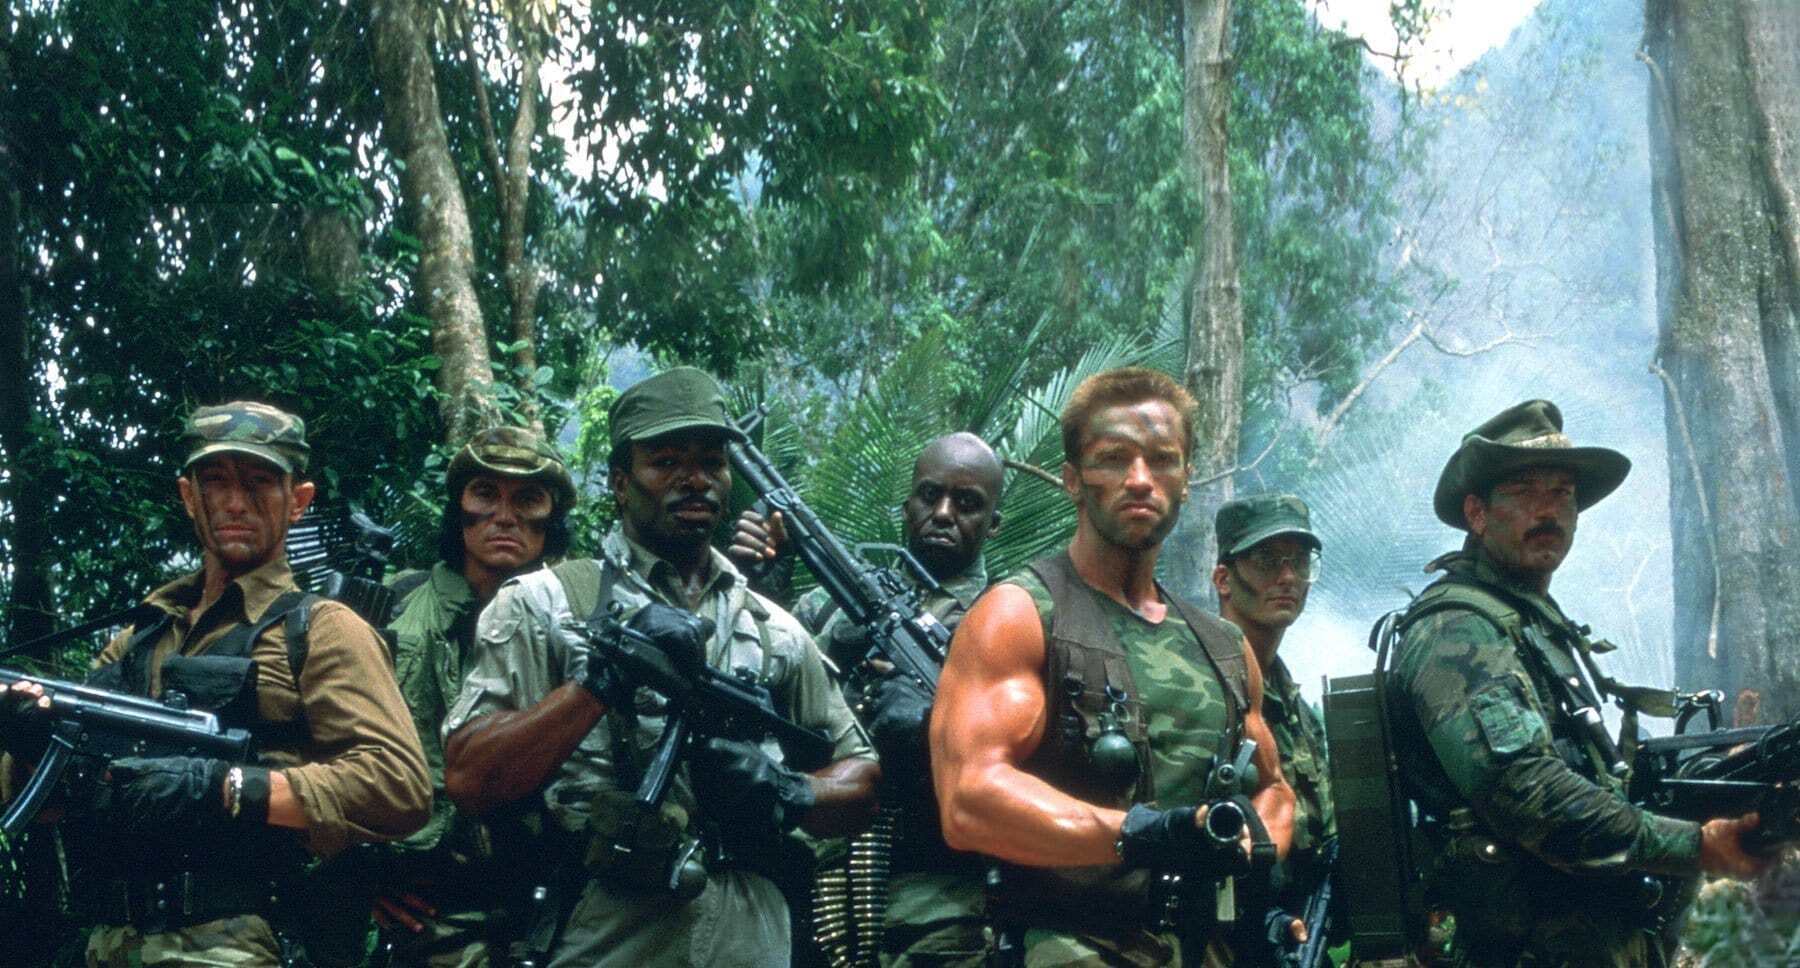 The Mid-Season Replacements Podcast Episode 77 – “The Trophy Room Vol. 2 – Predator (1987)”